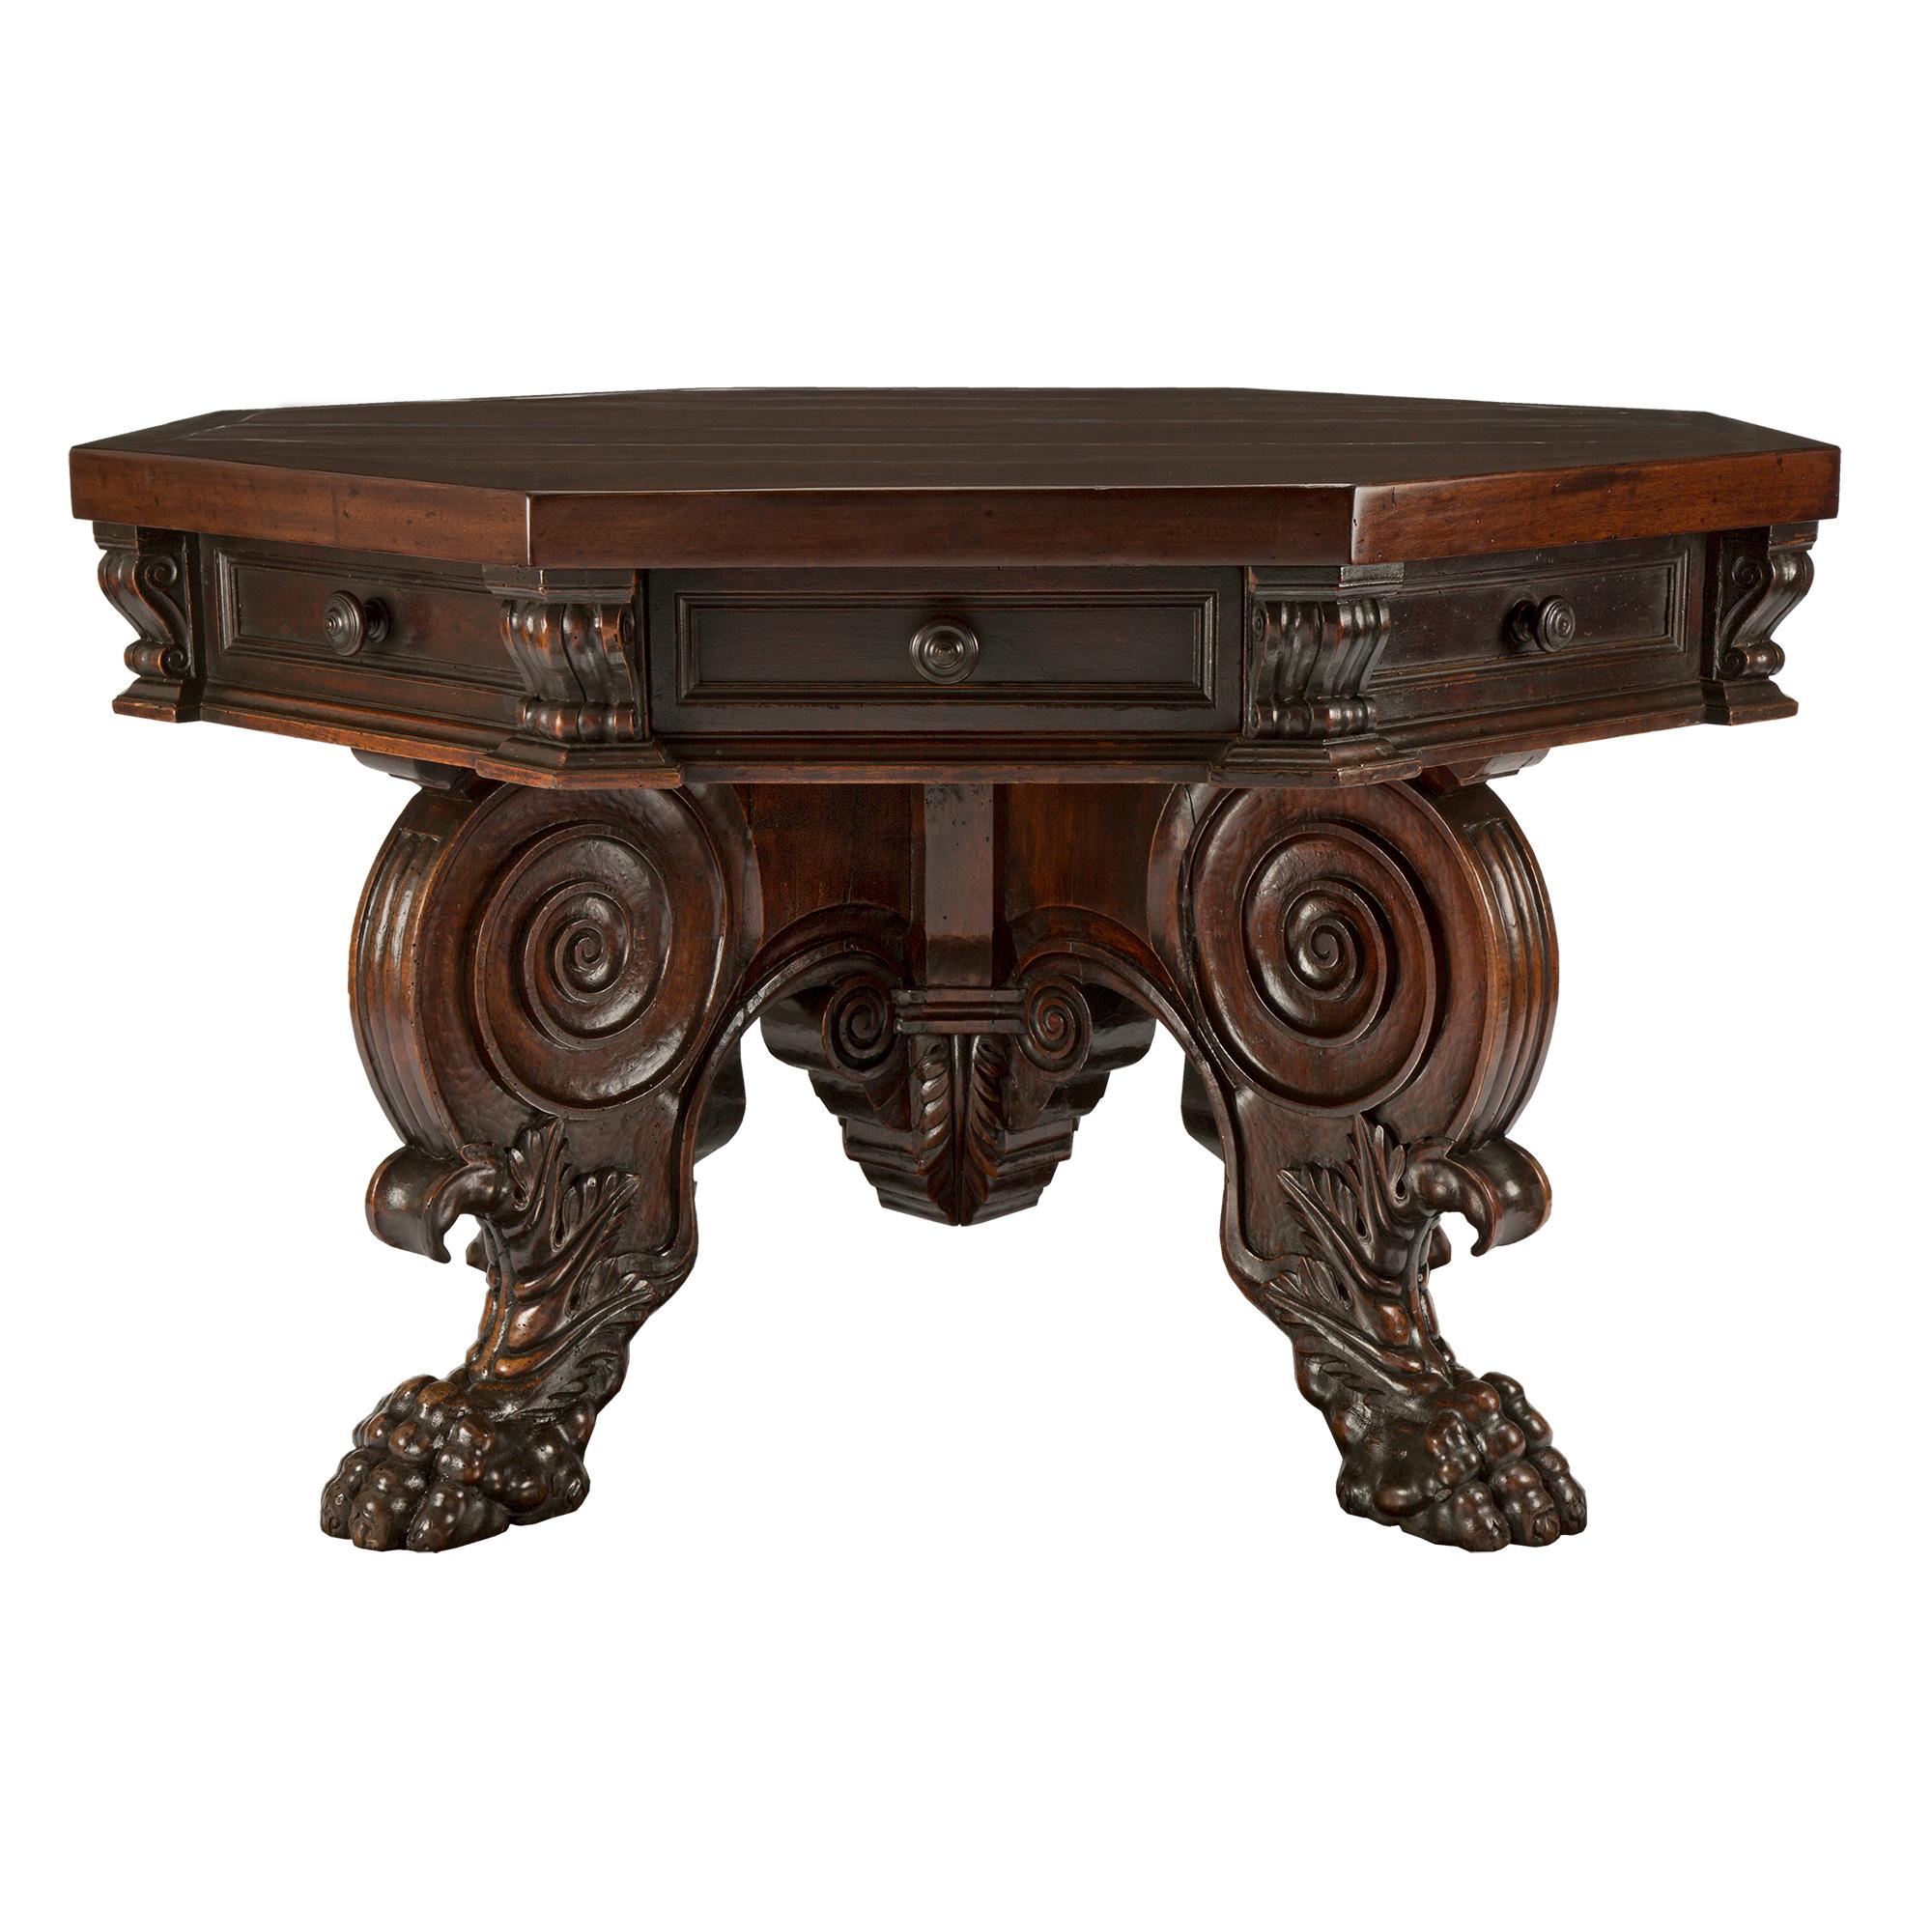 18th Century and Earlier Italian 17th Century Baroque Period Solid Walnut Octagonal Center Table For Sale